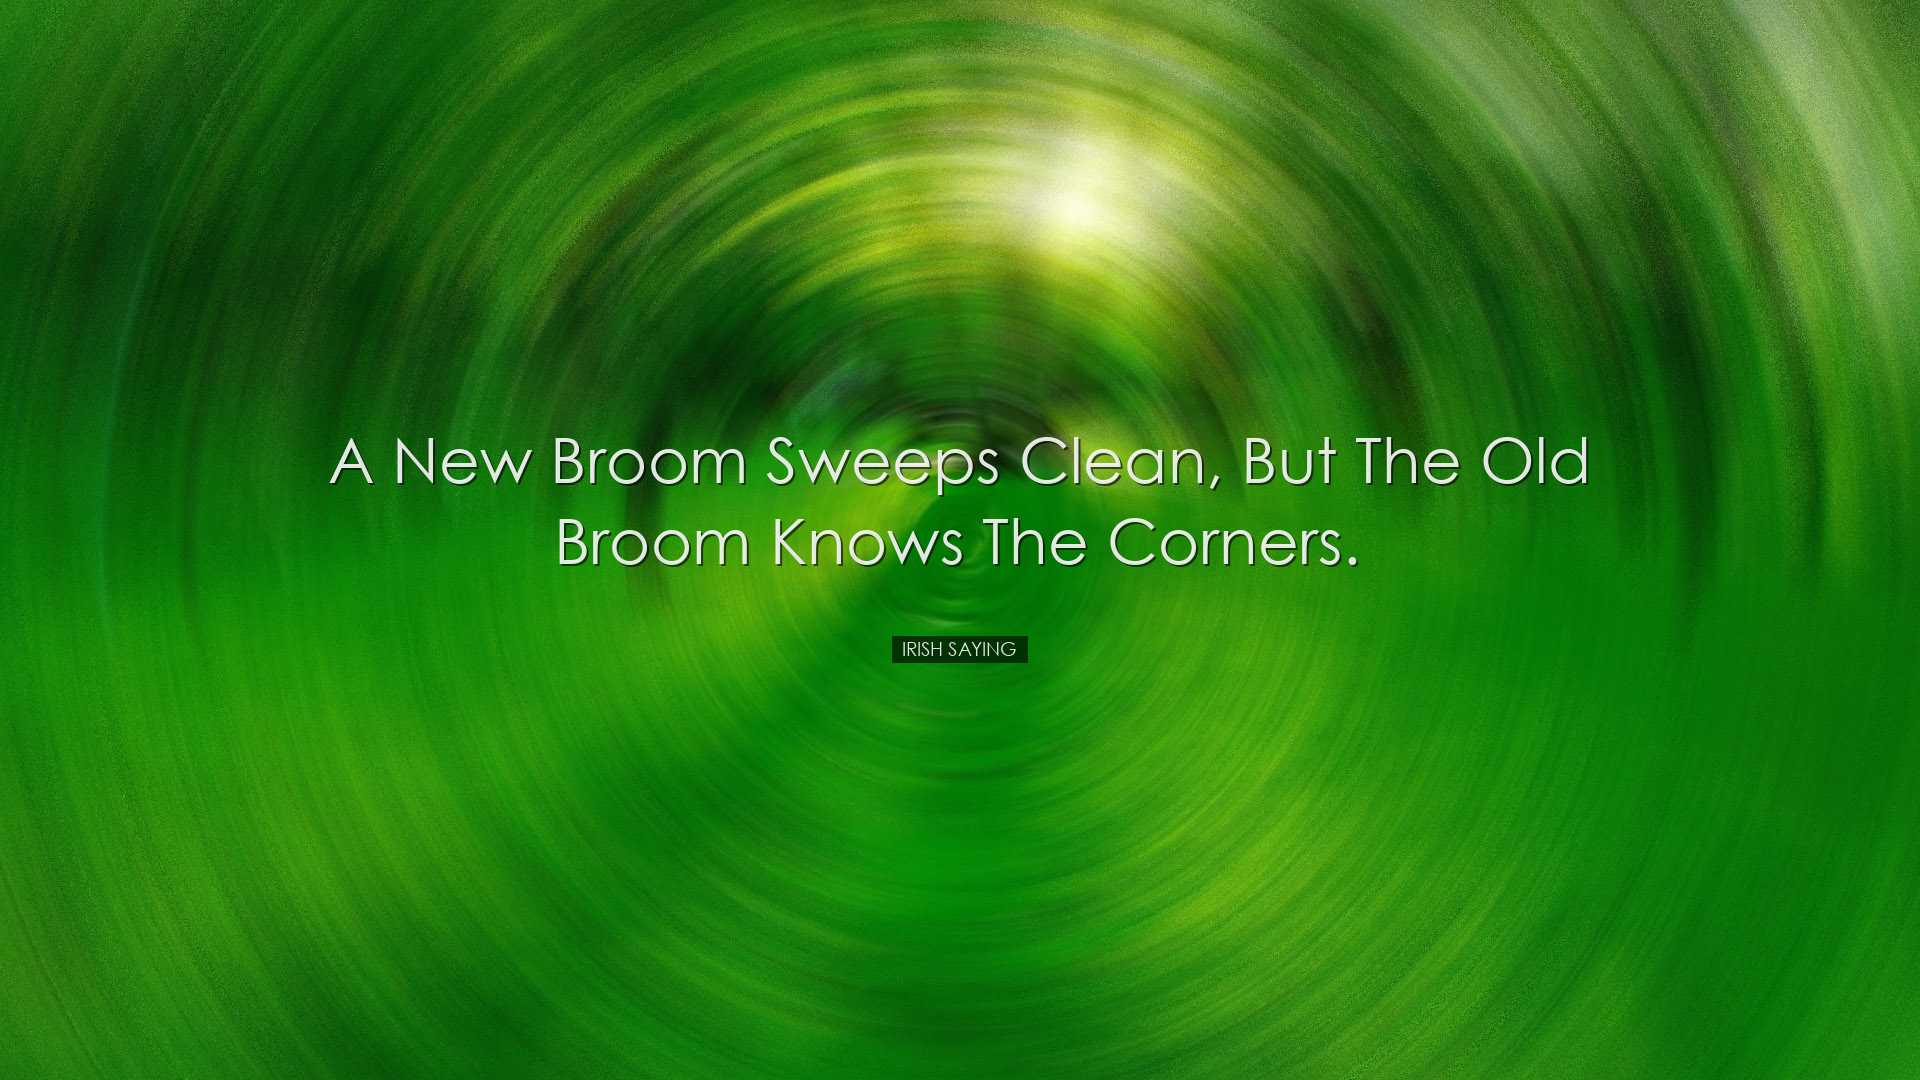 A new broom sweeps clean, but the old broom knows the corners. - I